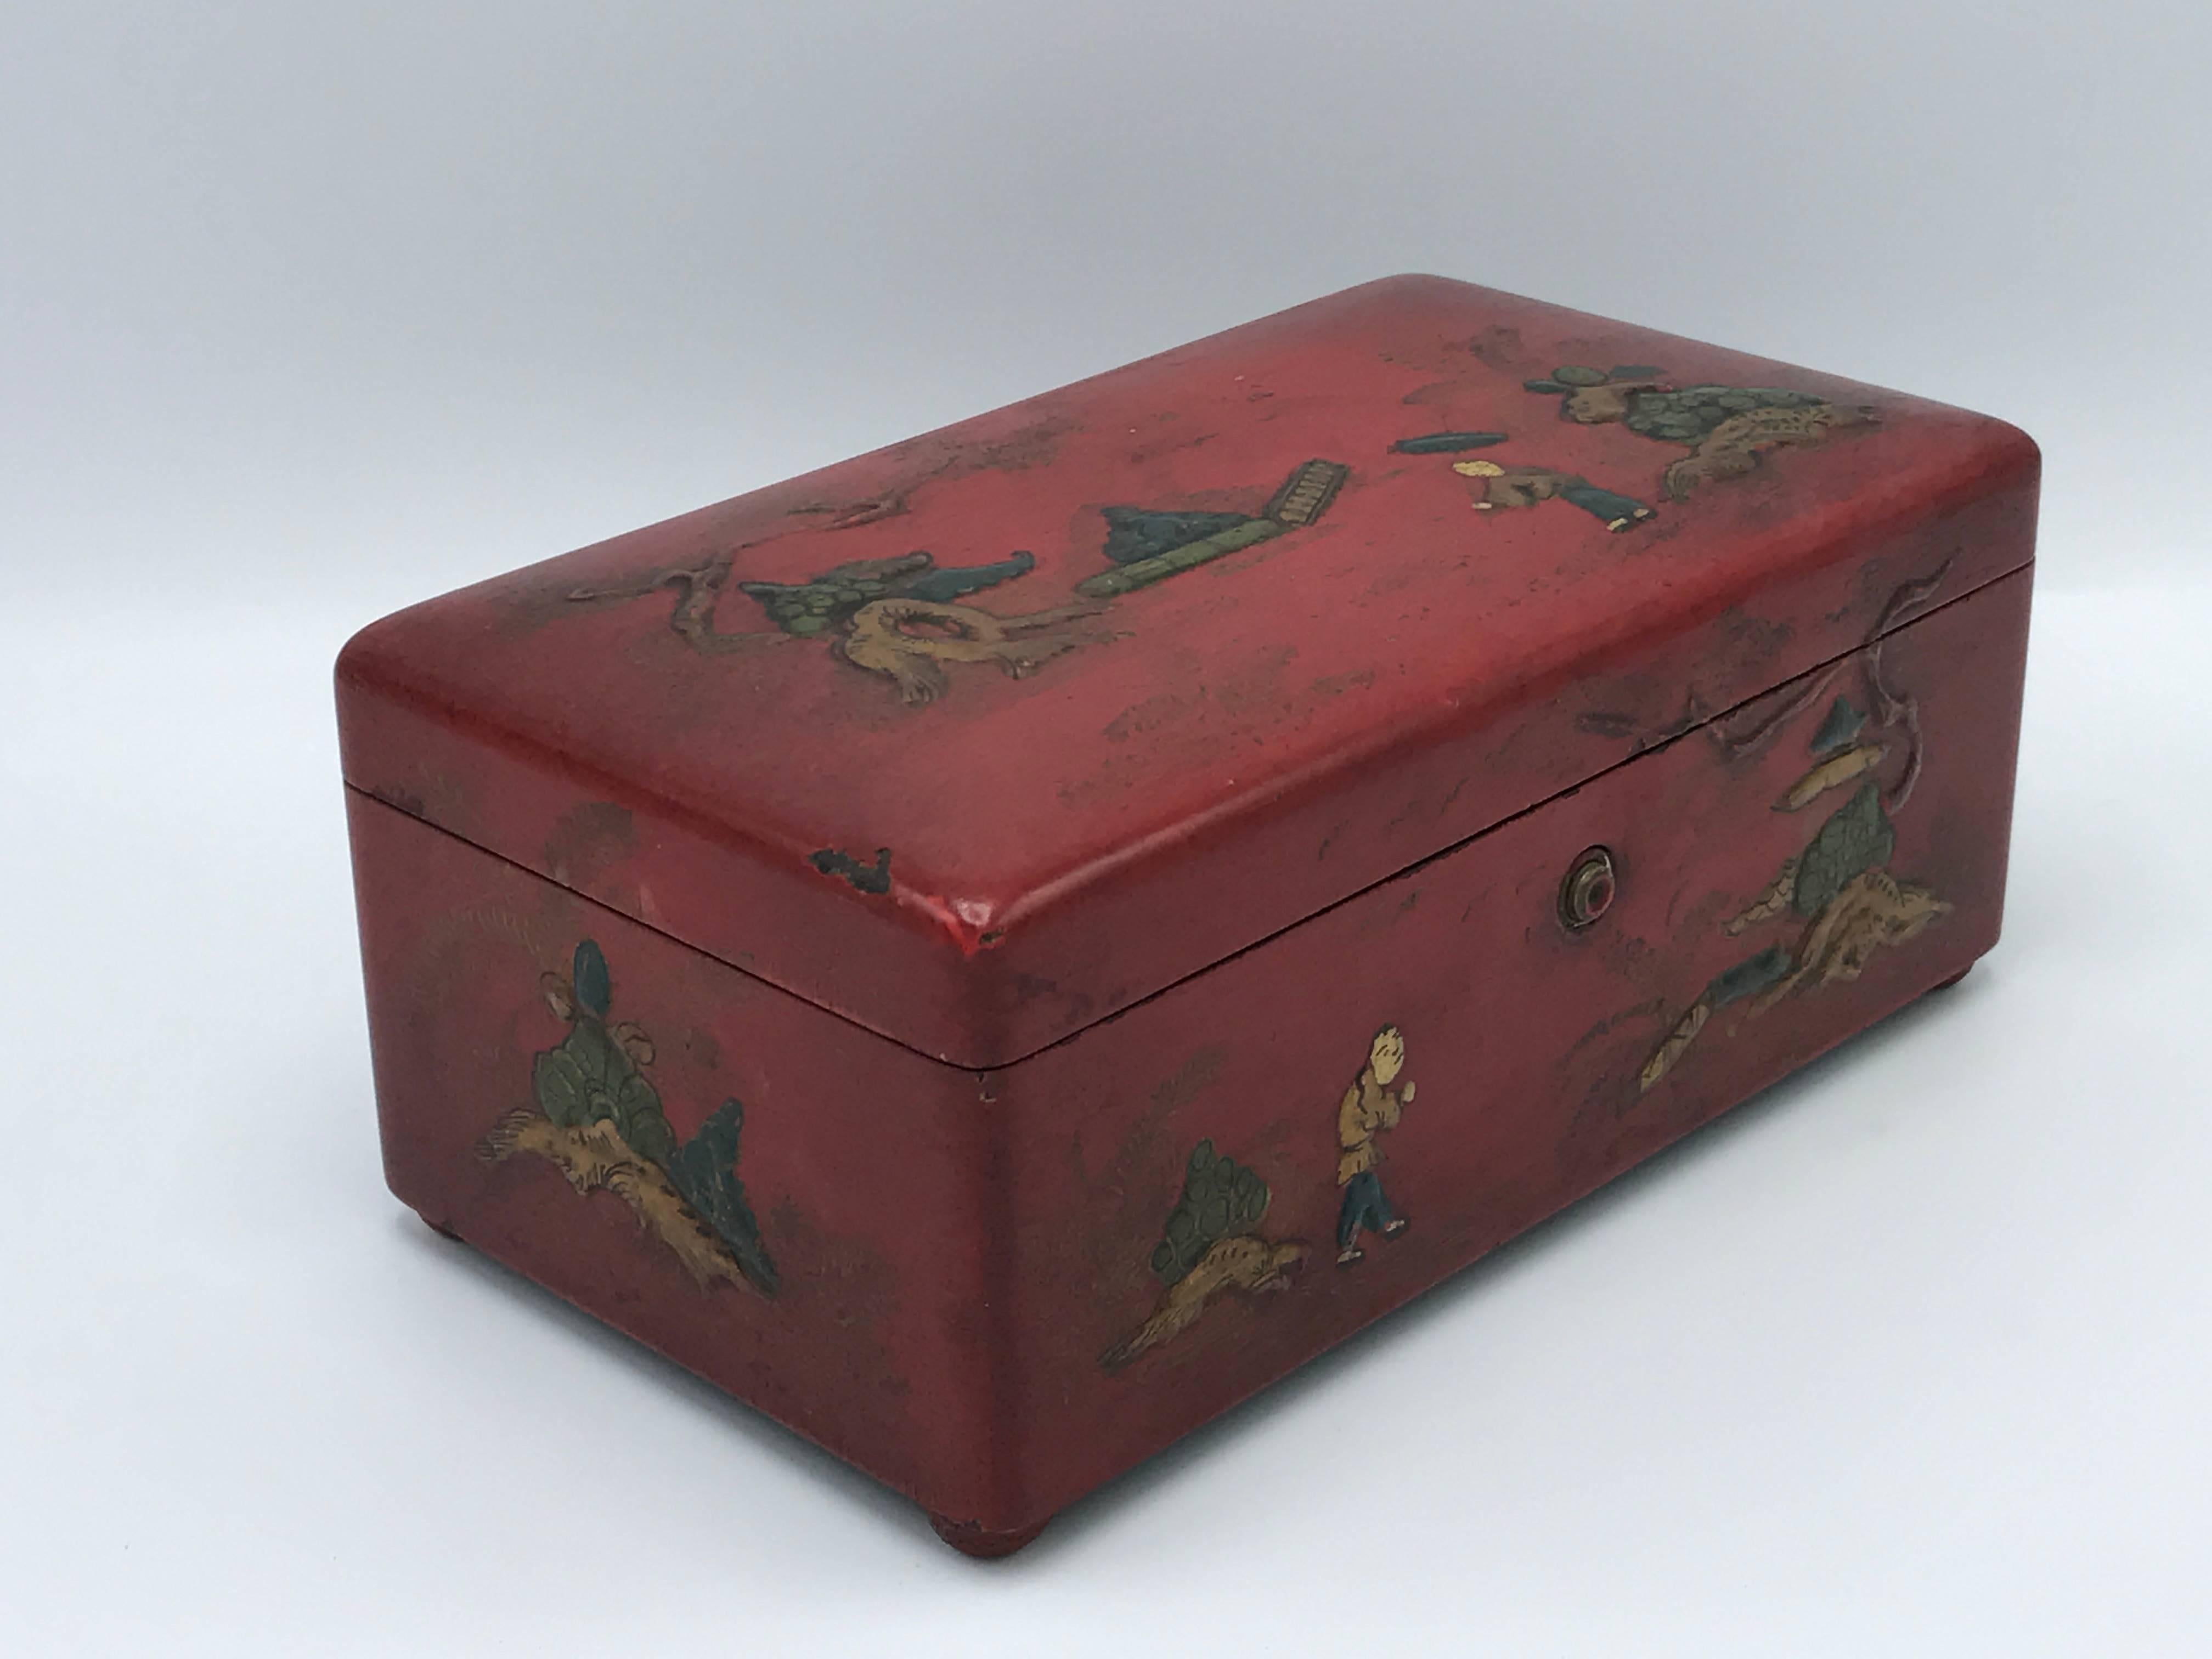 Offered is a stunning, late 19th century, Chinese red lacquered humidor decorative box. In the ornate design, each figure has raised faces. Working locking mechanism and hinges.